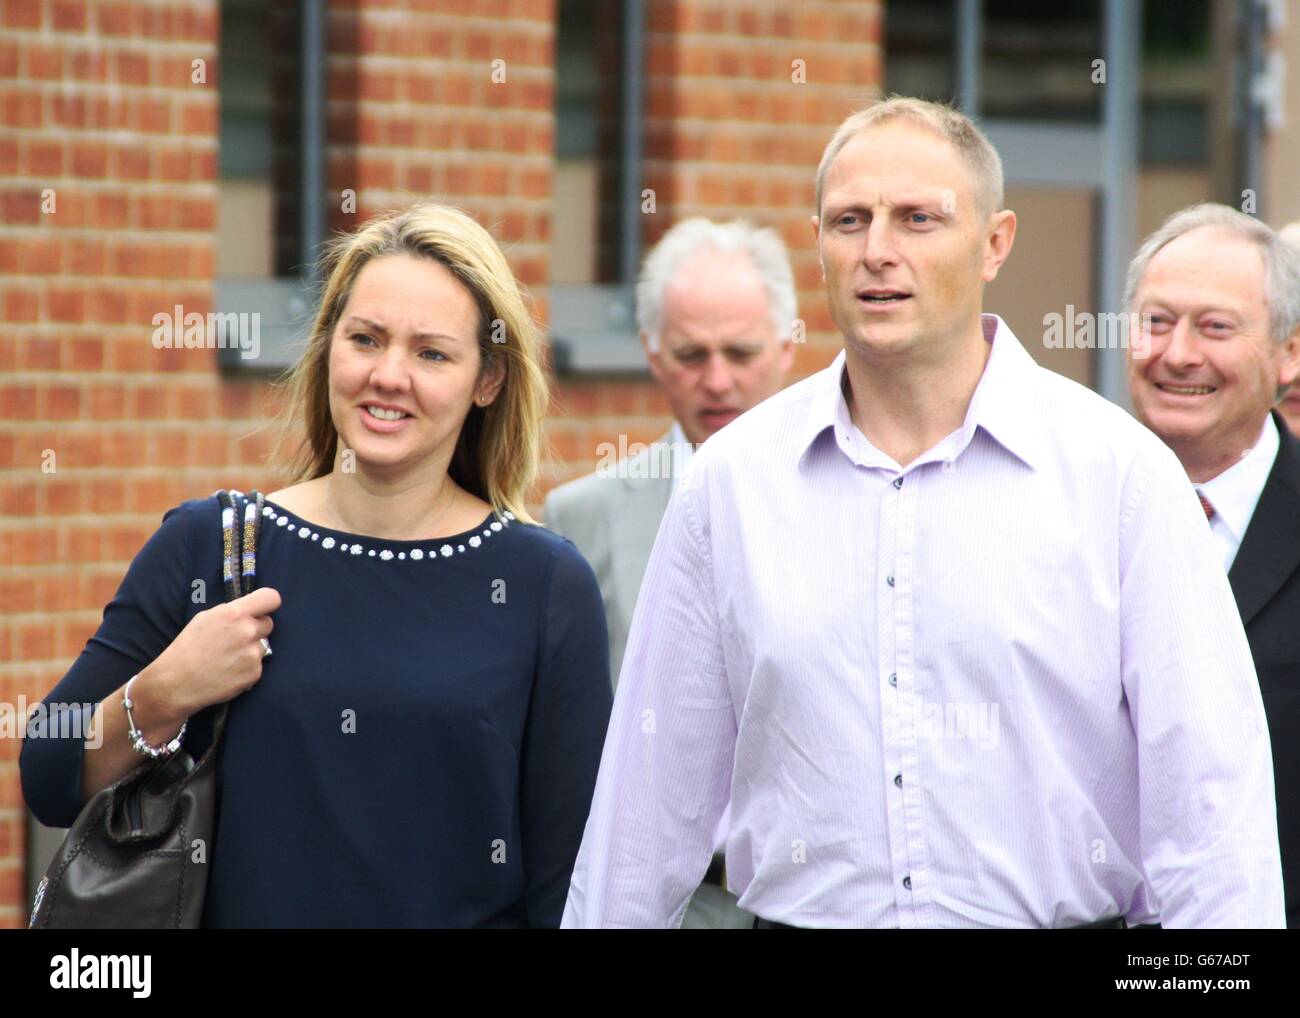 Former SAS sniper, Sgt Danny Nightingale arrives with wife Sally at the Military Court Centre, Bulford, Wiltshire, for the second day of his trial. The trial is expected to begin today, following a day of legal argument yesterday. The former SAS sniper is accused of illegally possessing a gun and ammunition. Stock Photo